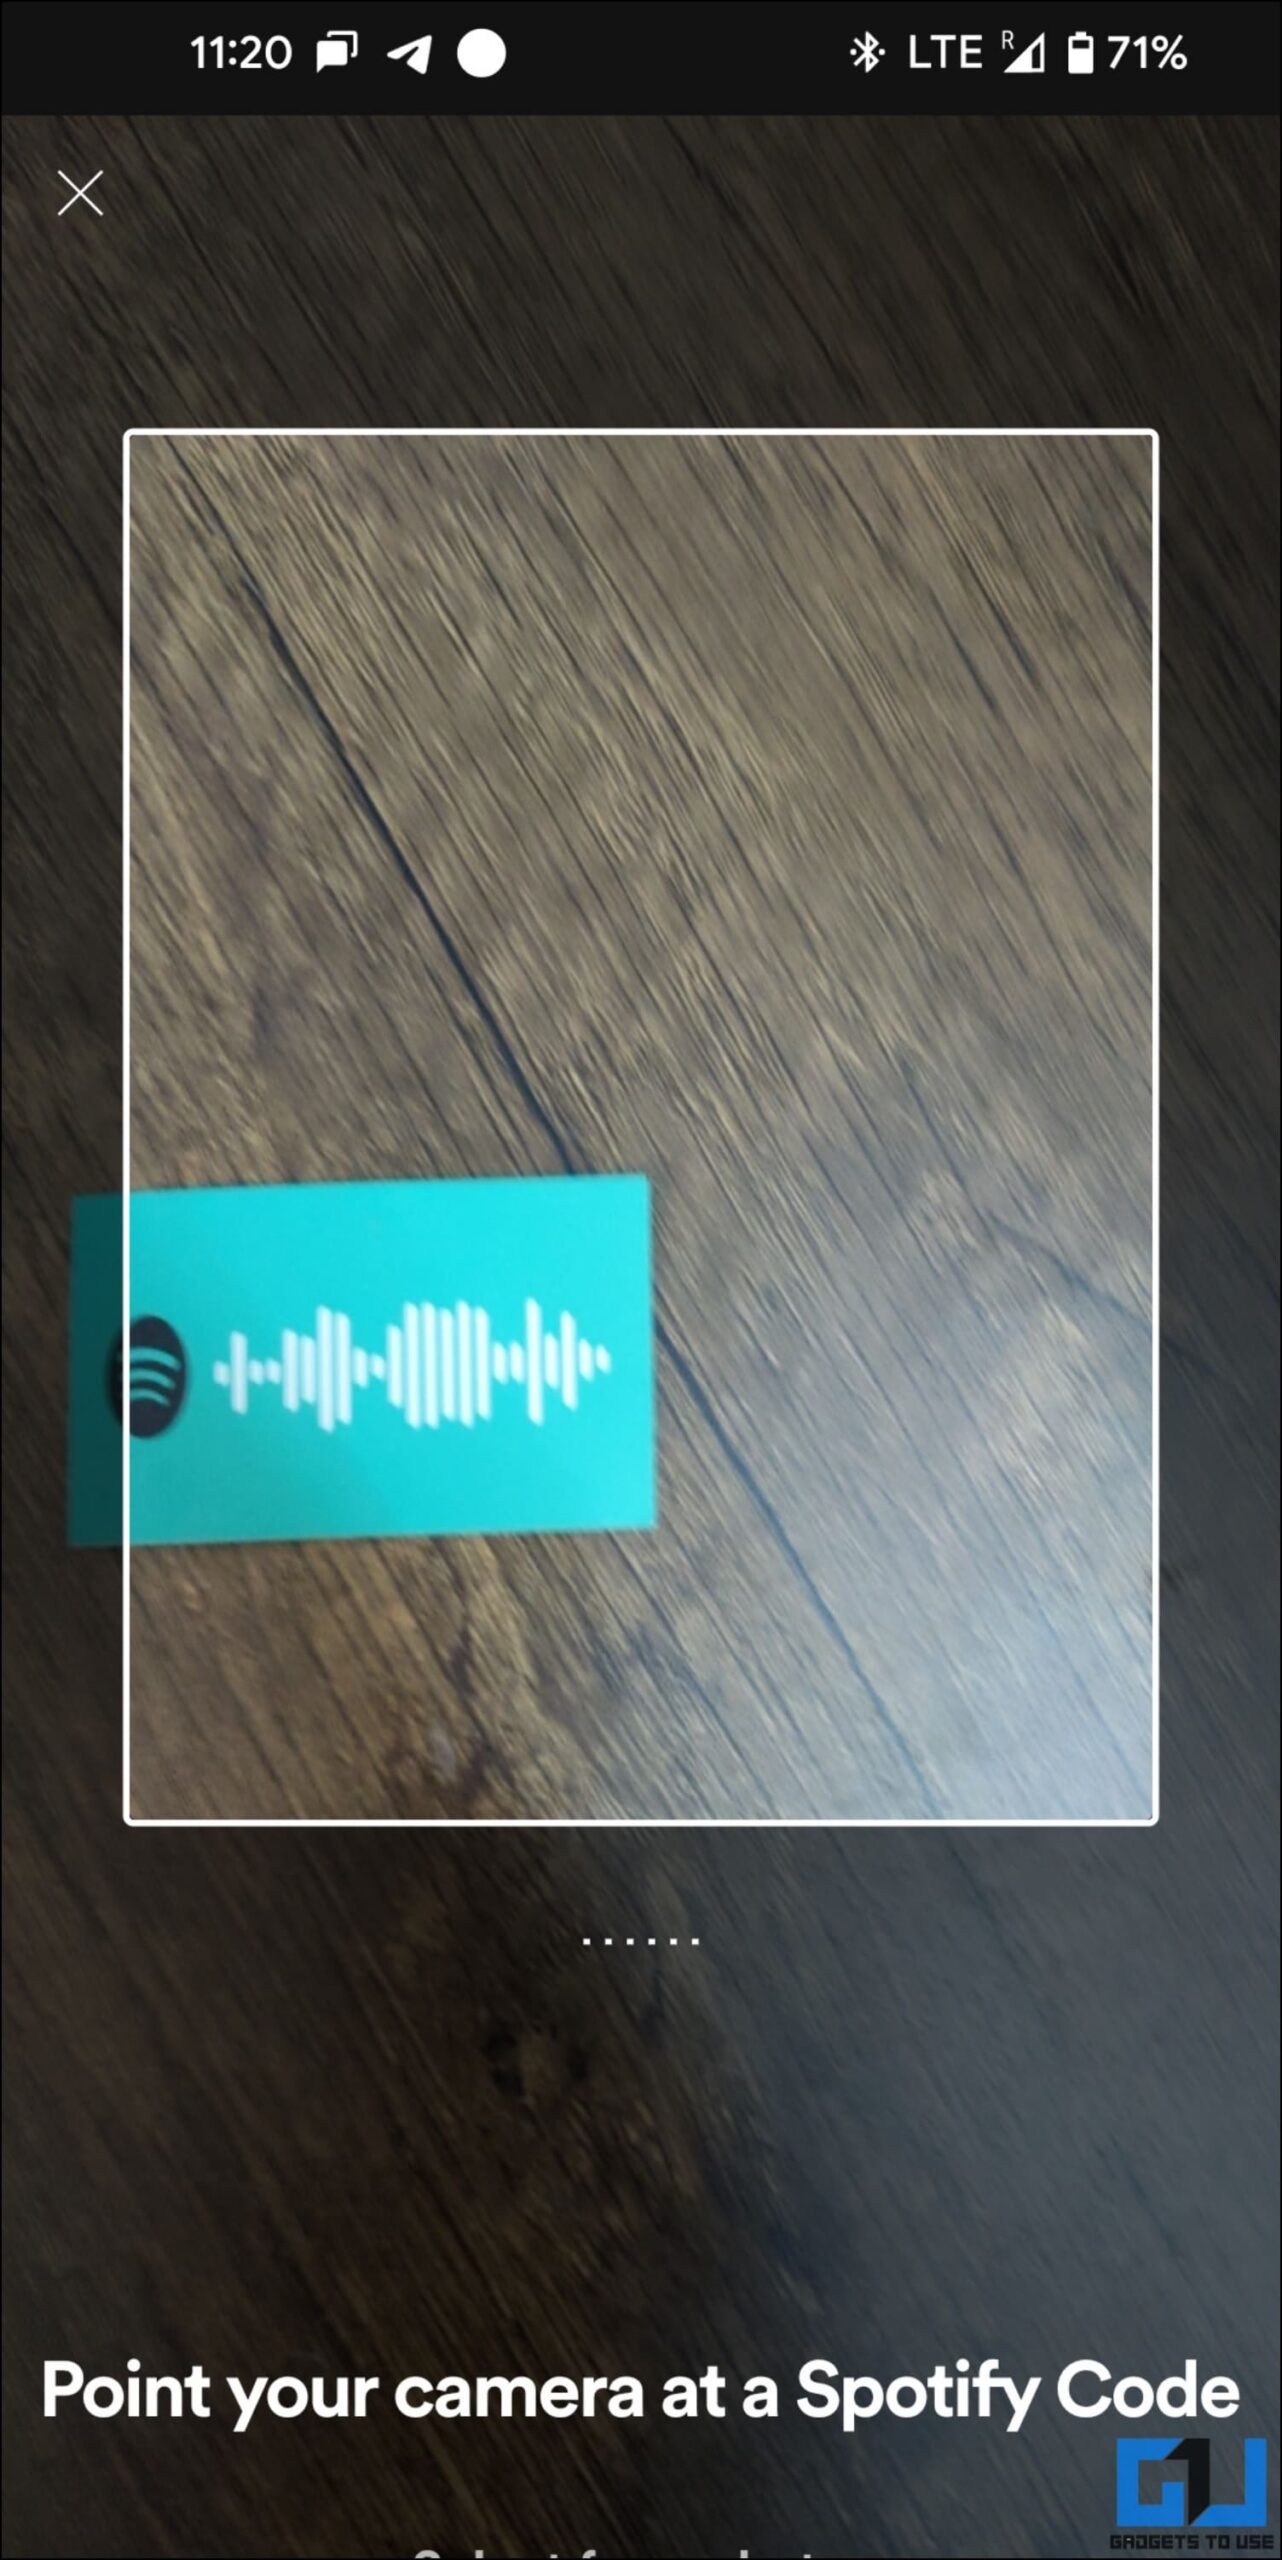 Scan a Spotify Code on Phone